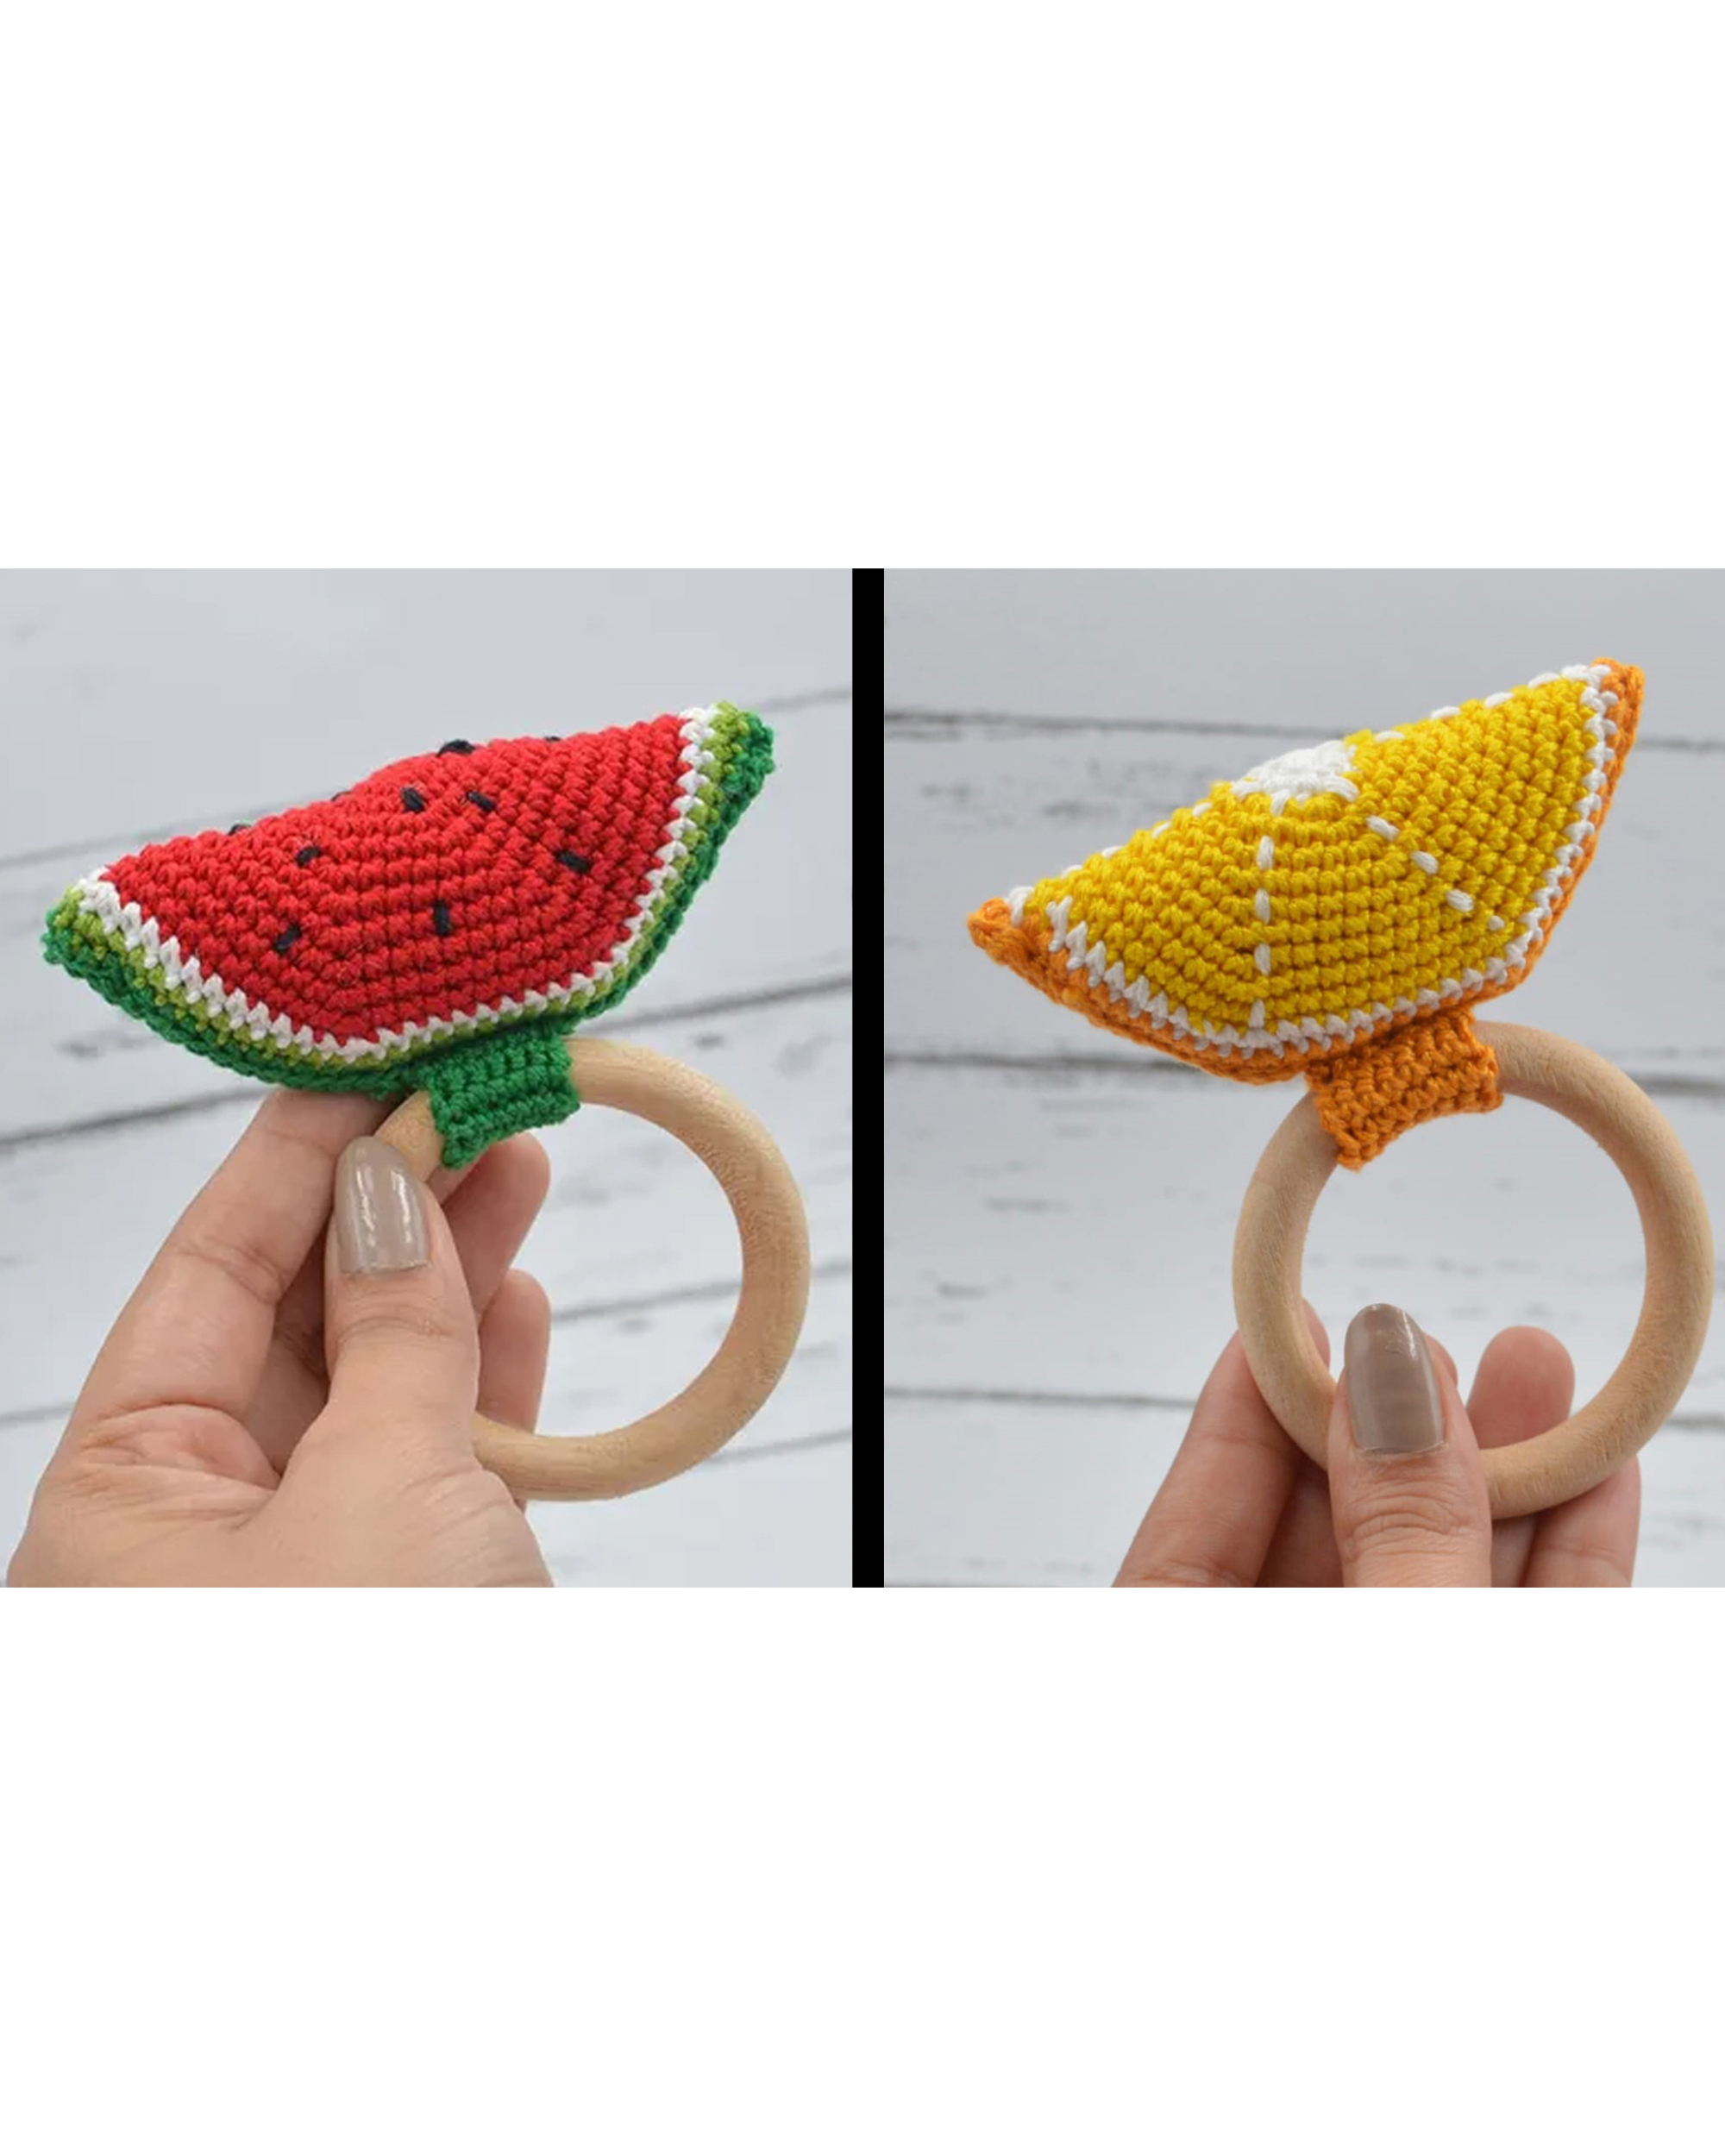 Red and yellow hand crochet fruit rattle - set of two